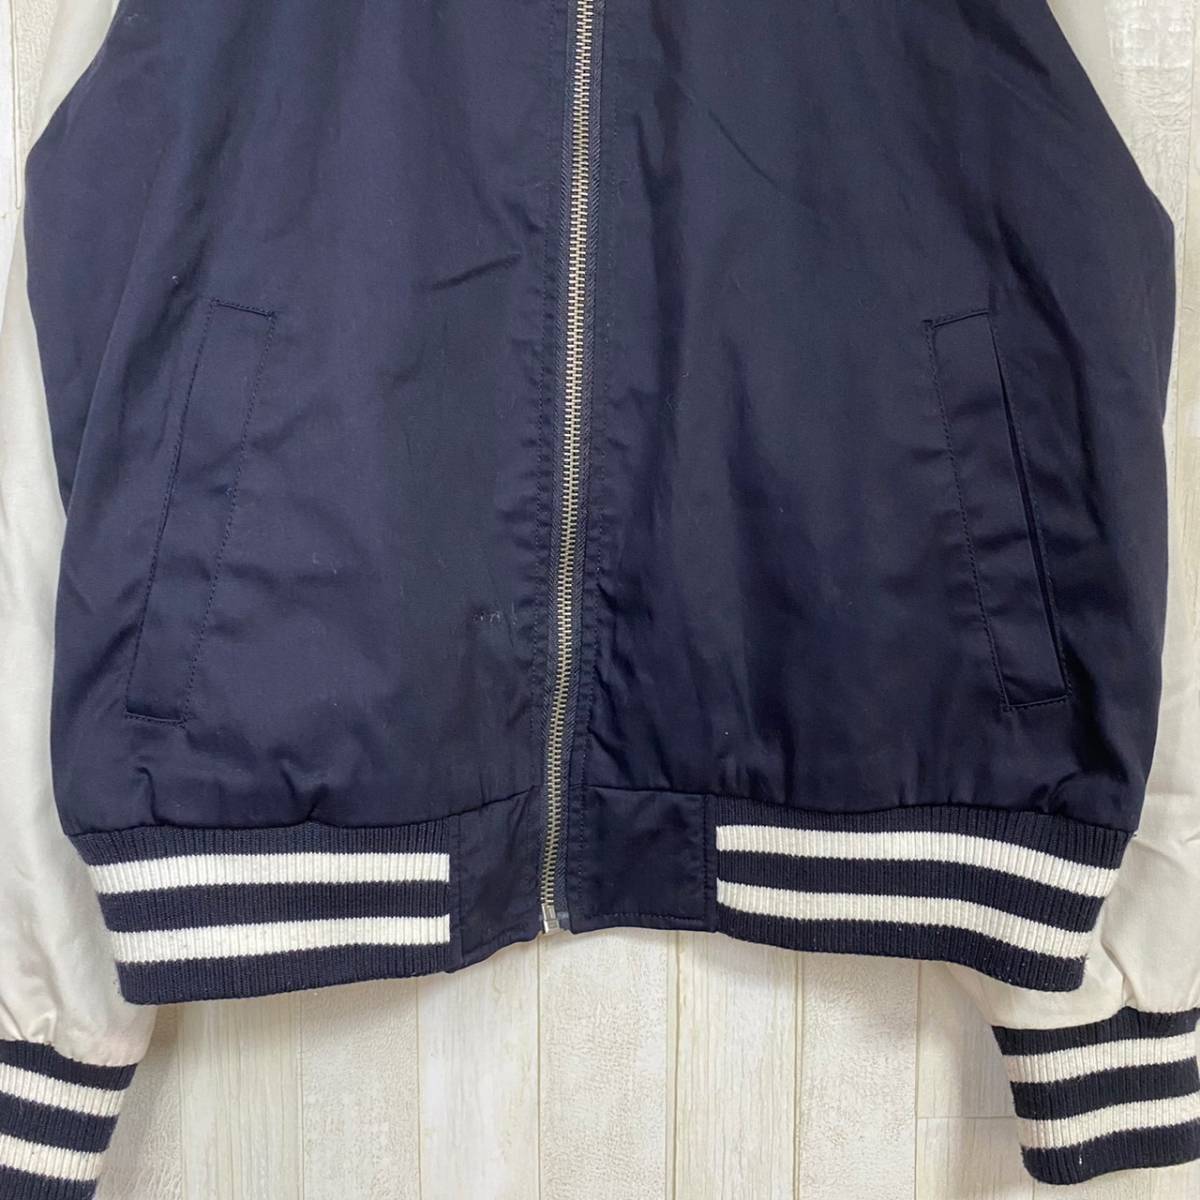 For it* four ito* lady's stadium jumper blouson * size M 1012-9